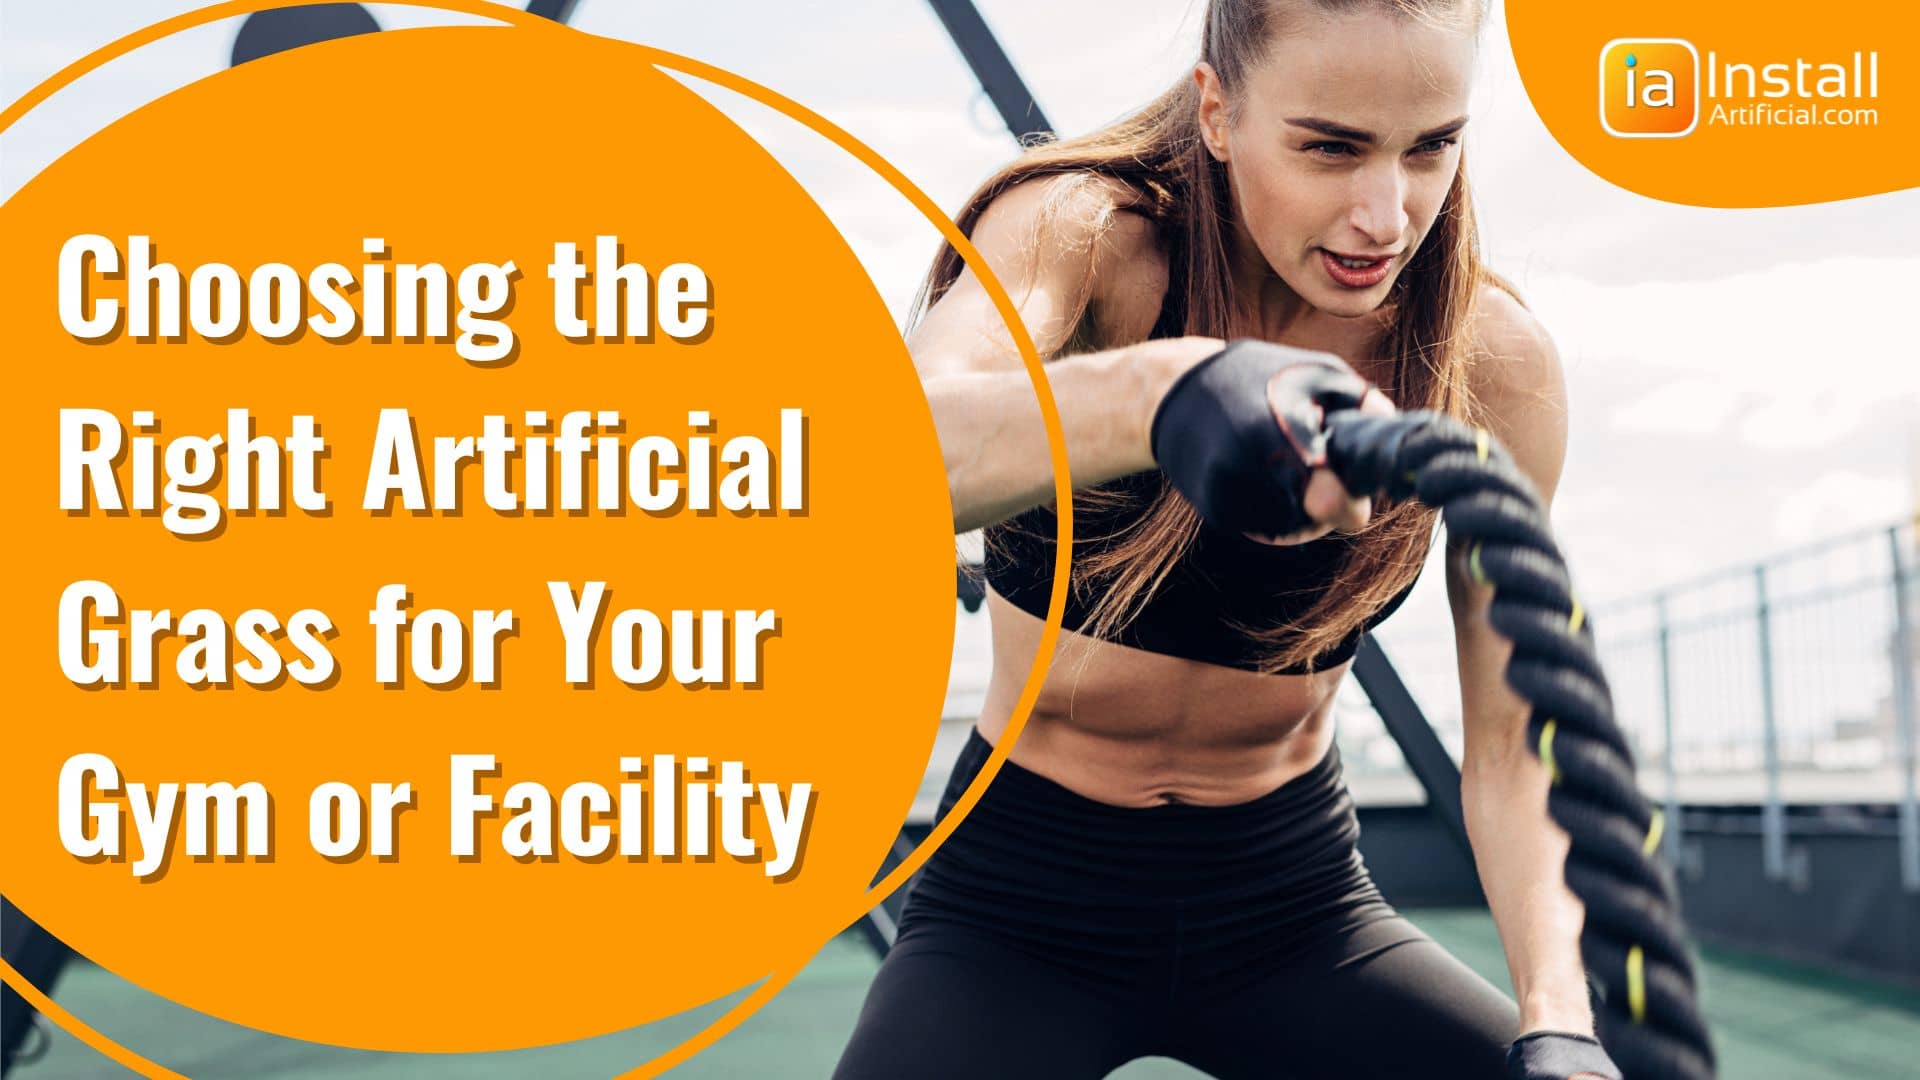 Guide to Choosing the Right Artificial Grass for Your Gym or Facility